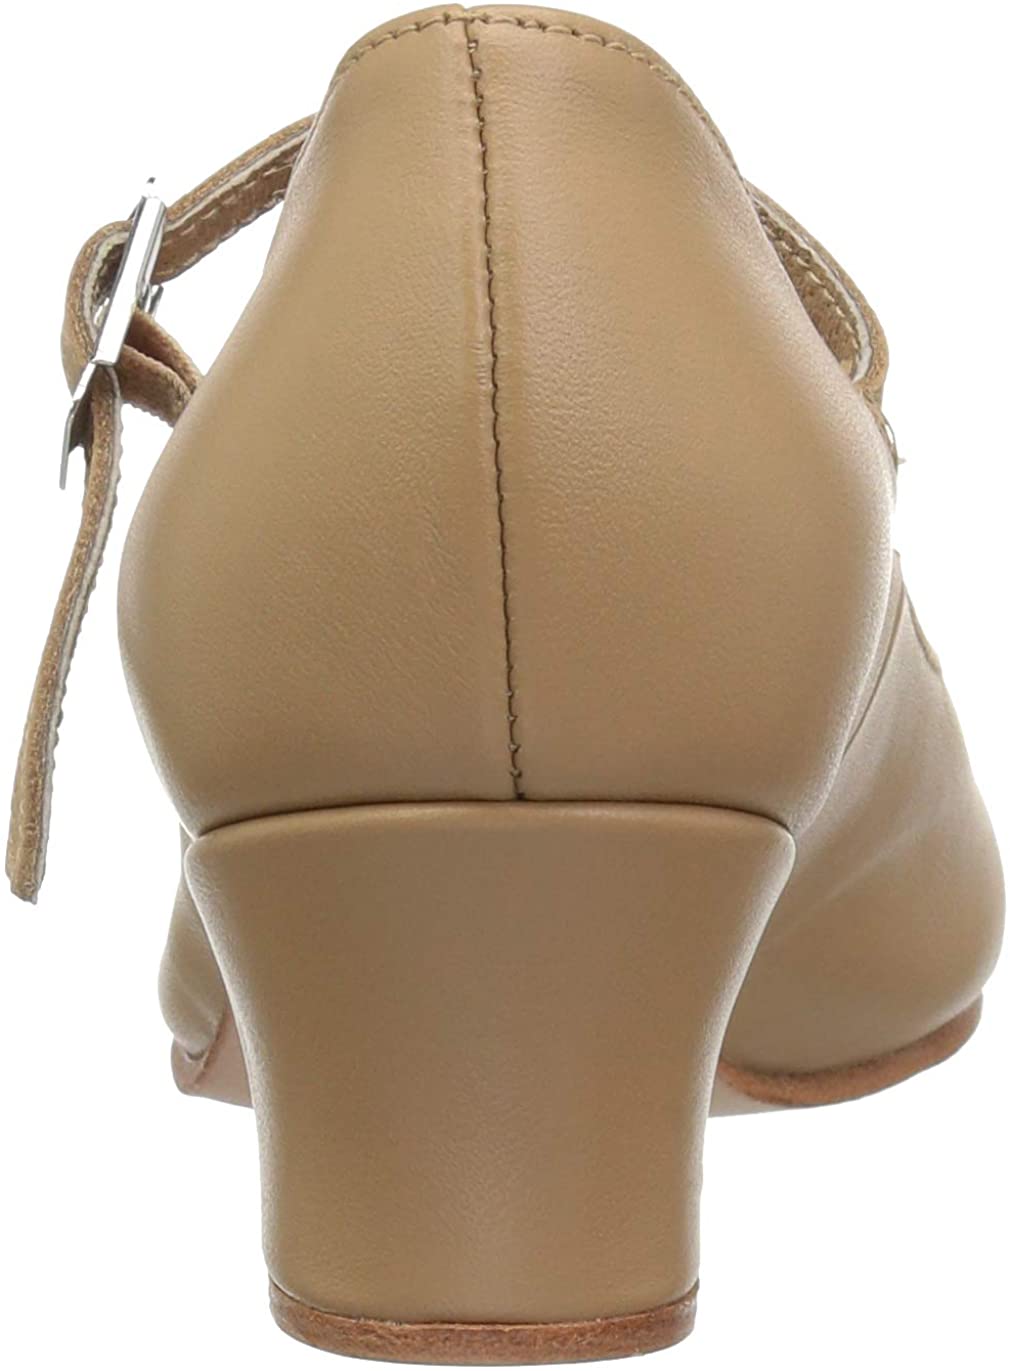 Bloch Dance Women's Curtain Call Leather Character Shoe 1.5" Heel S0304L